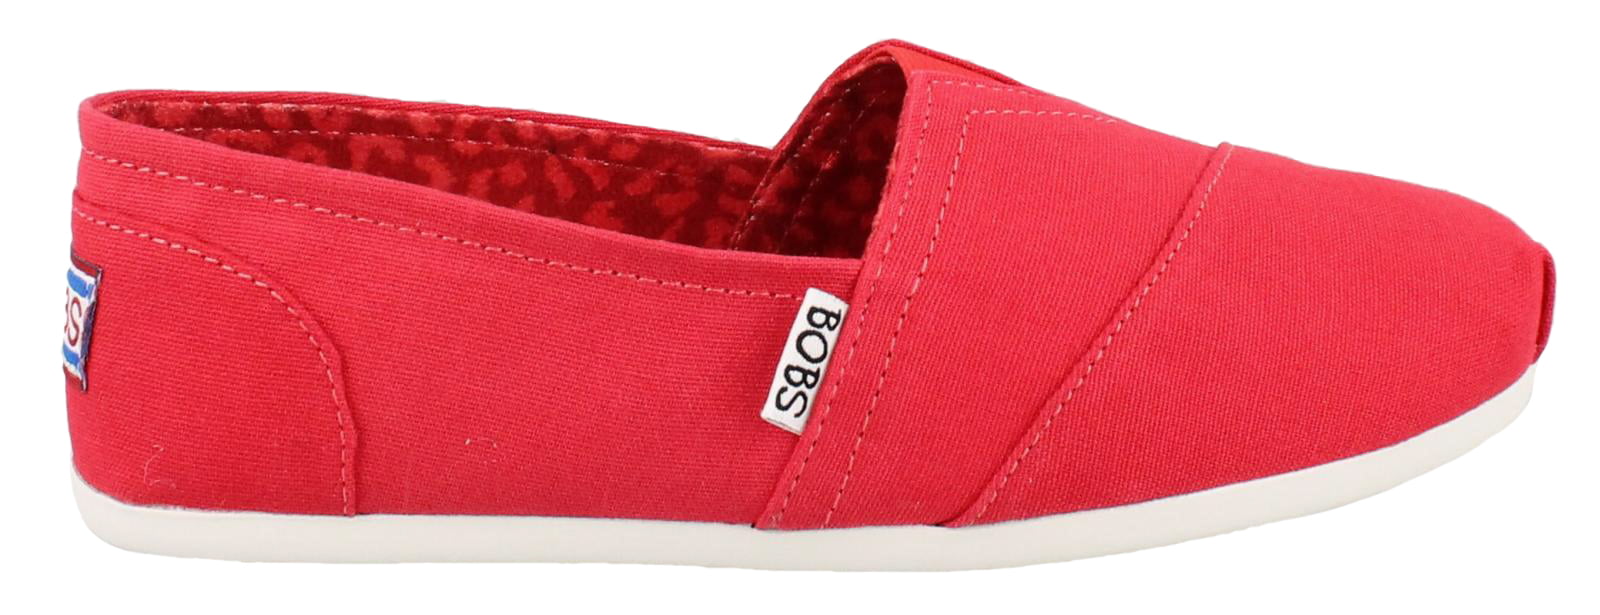 BOBS from Skechers Women's Plush Peace and Love Flat,Red,8.5 M US